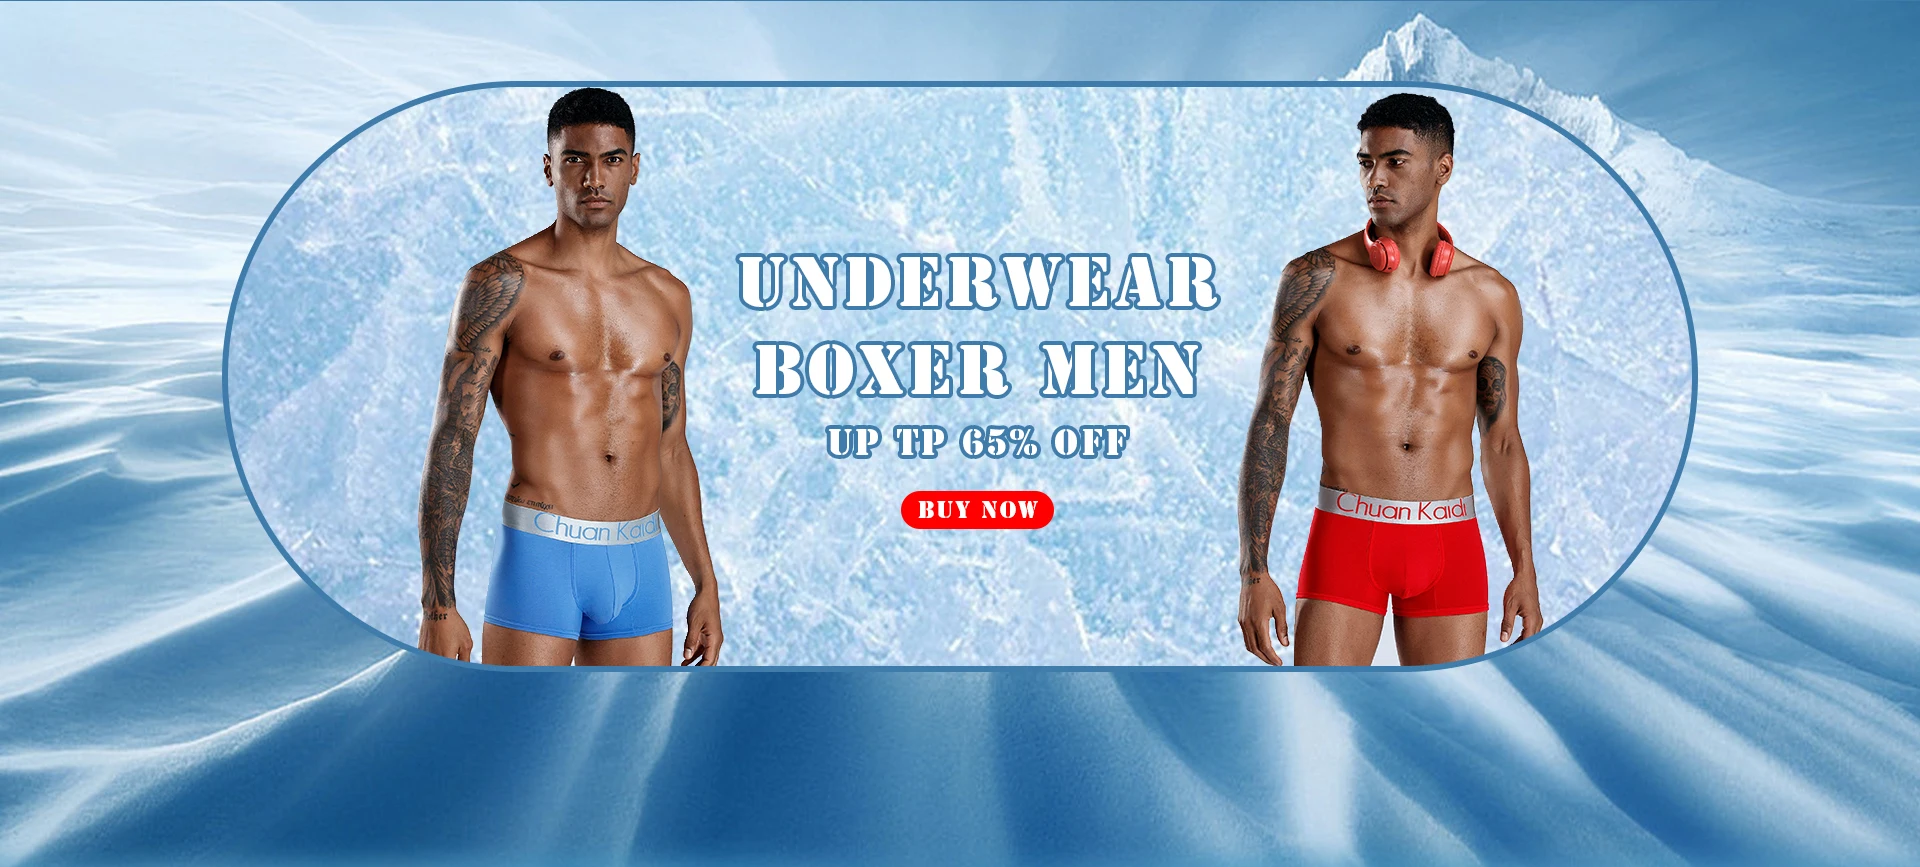 Ali Men's Panties Store - Amazing products with exclusive